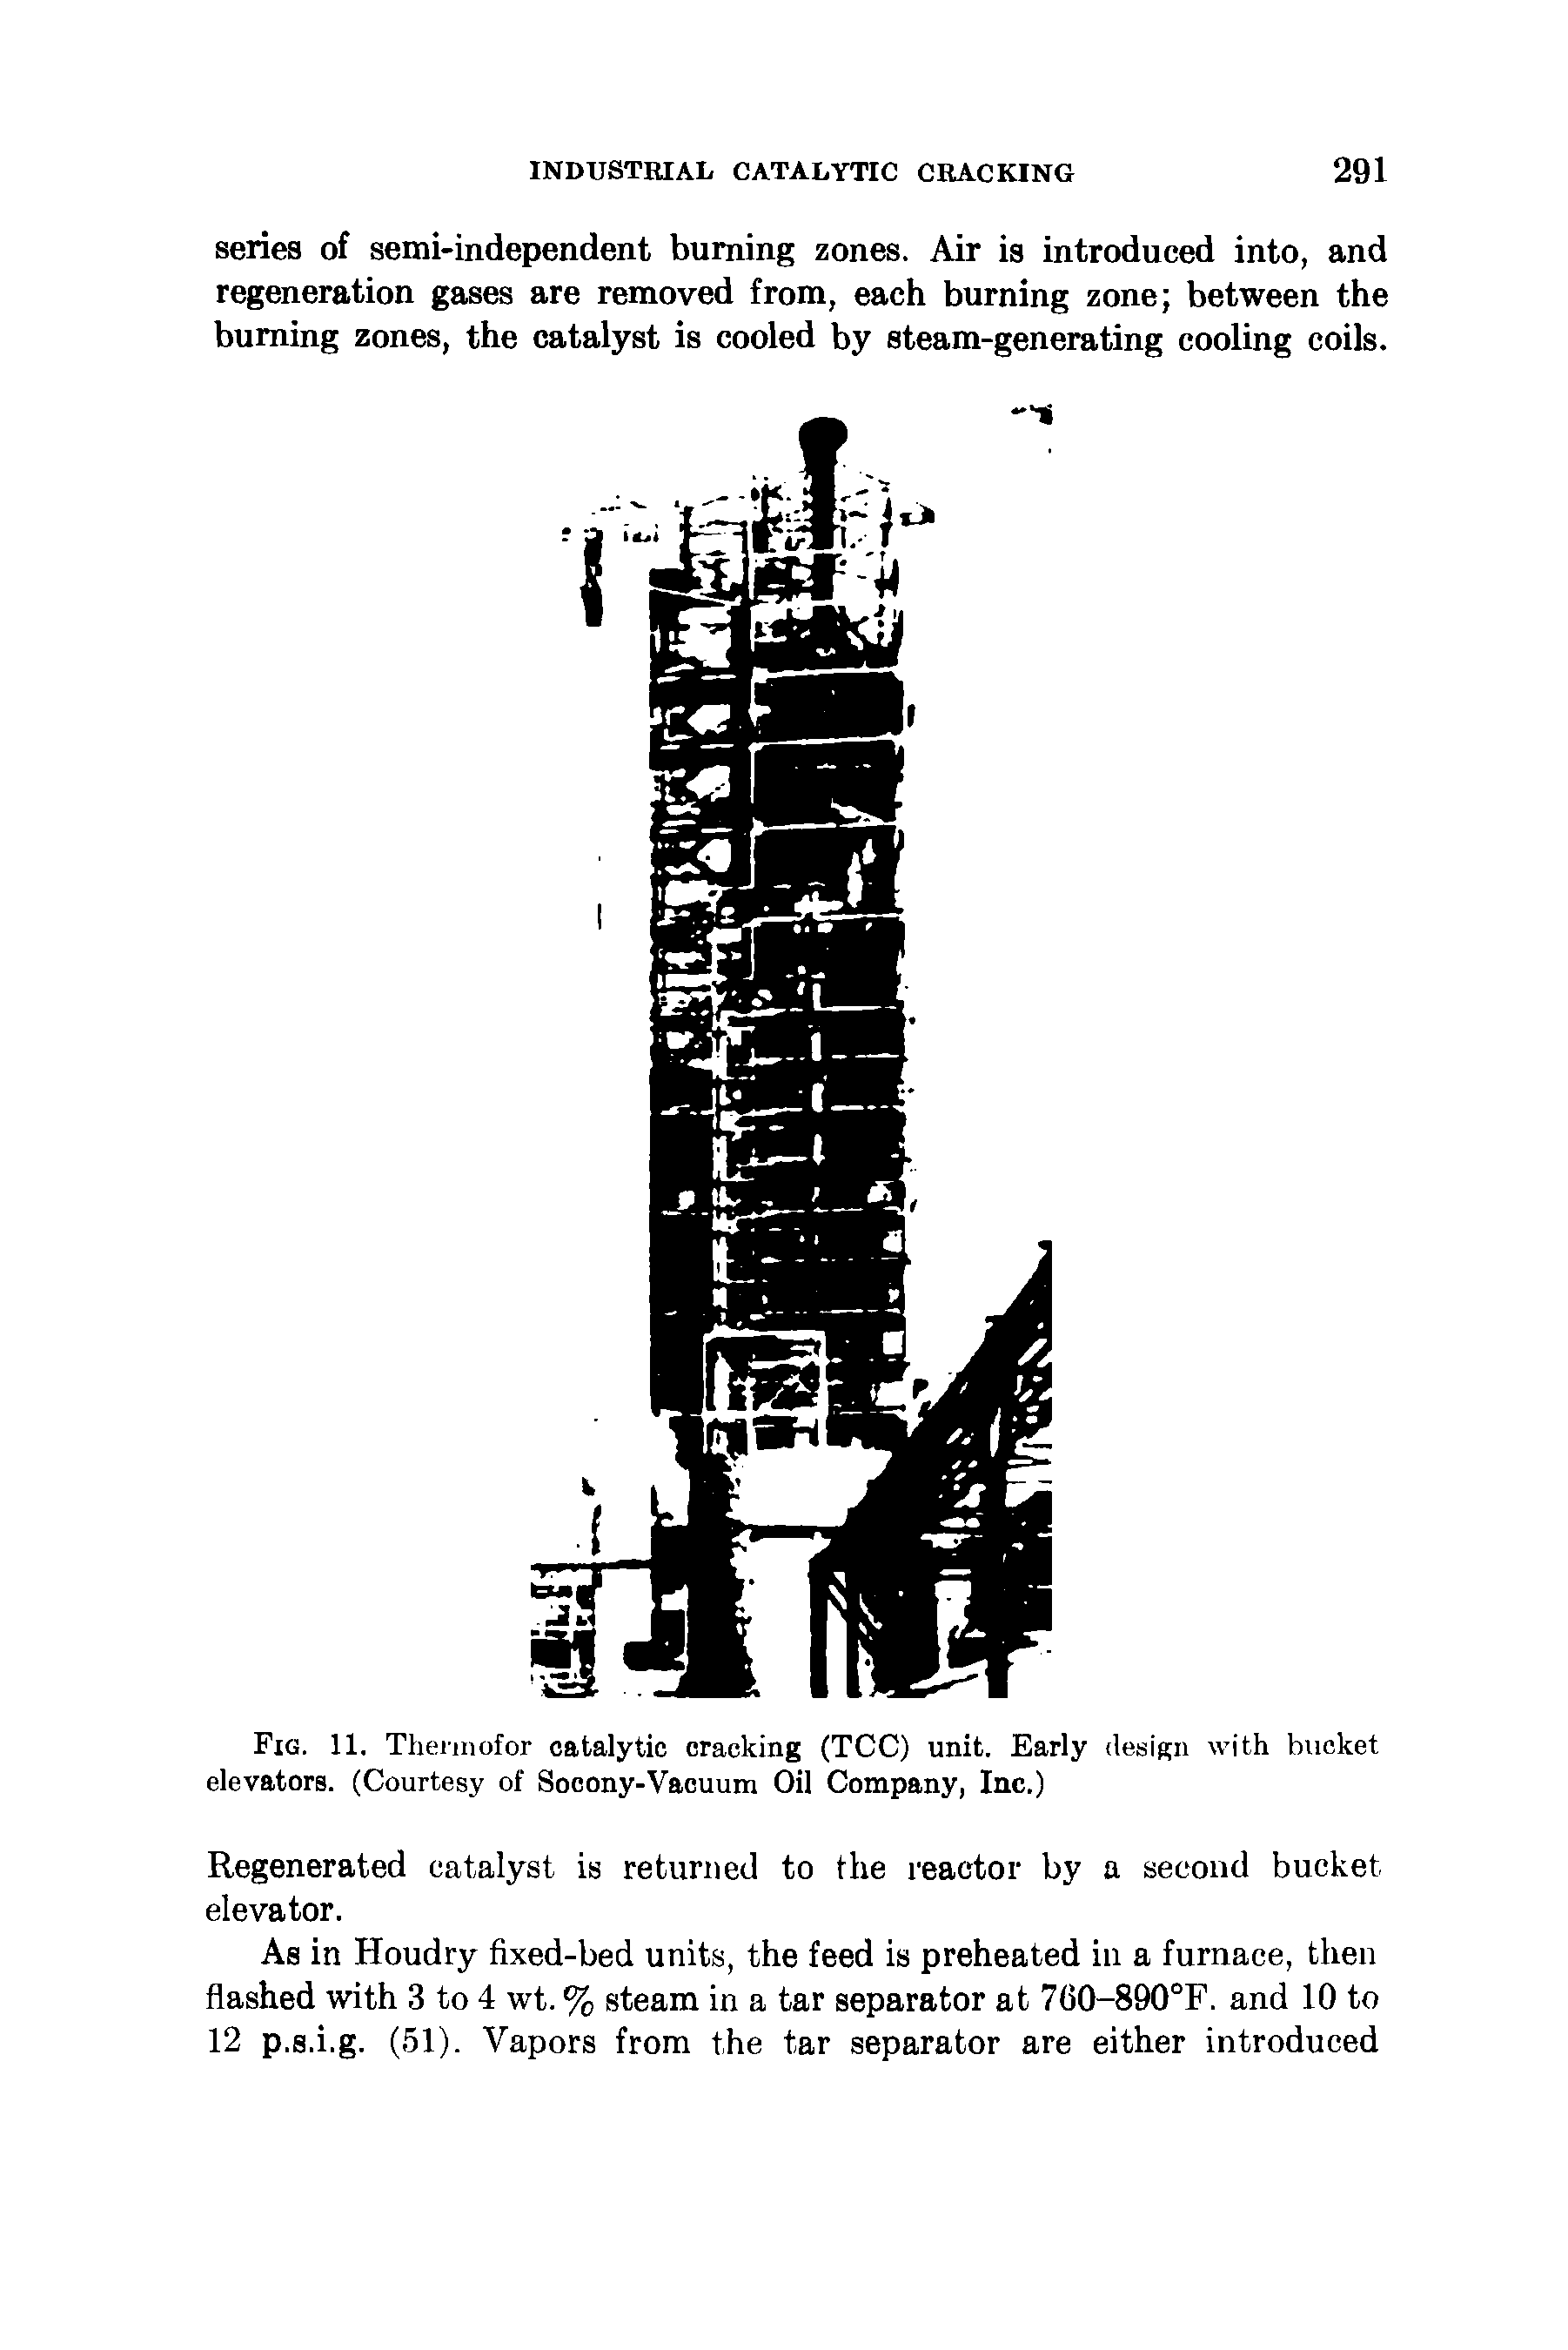 Fig. 11. Thennofor catalytic cracking (TCC) unit. Early design with bucket elevators. (Courtesy of Socony-Vacuum Oil Company, Inc.)...